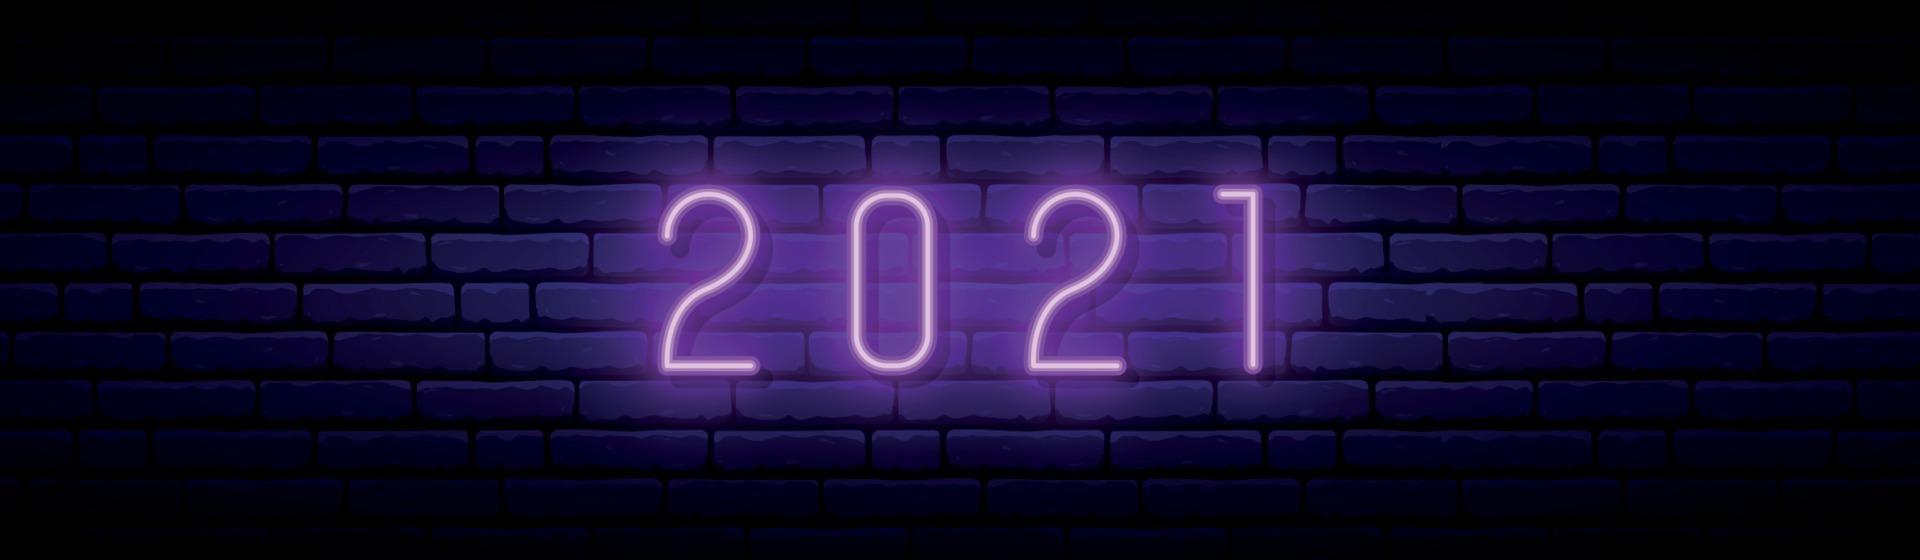 New Year 2021 neon sign. Glowing violet number 2021 on dark brick wall background. vector